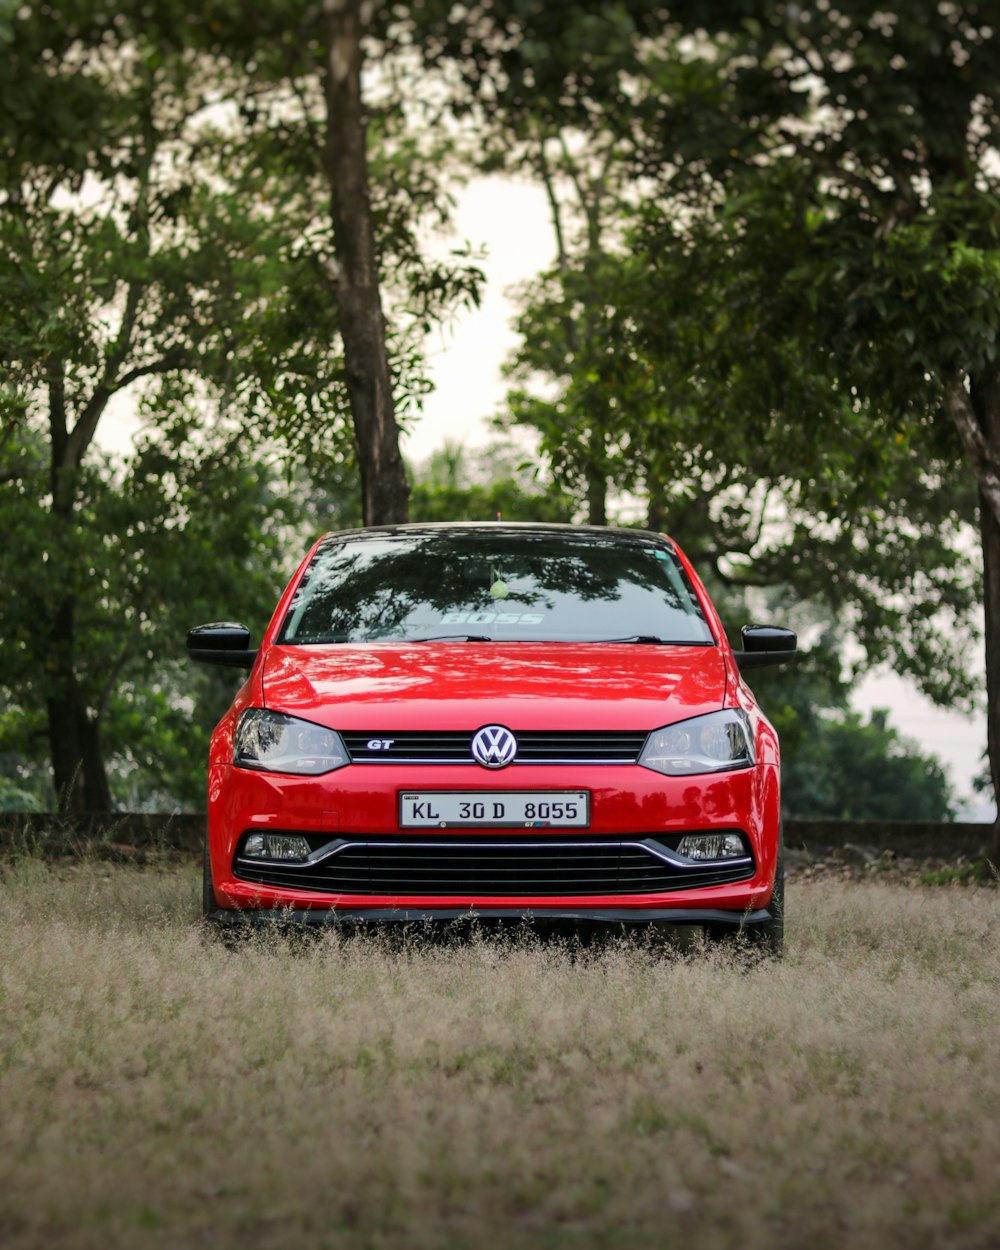 Volkswagen Polo Pictures | Download Free Images on Unsplash